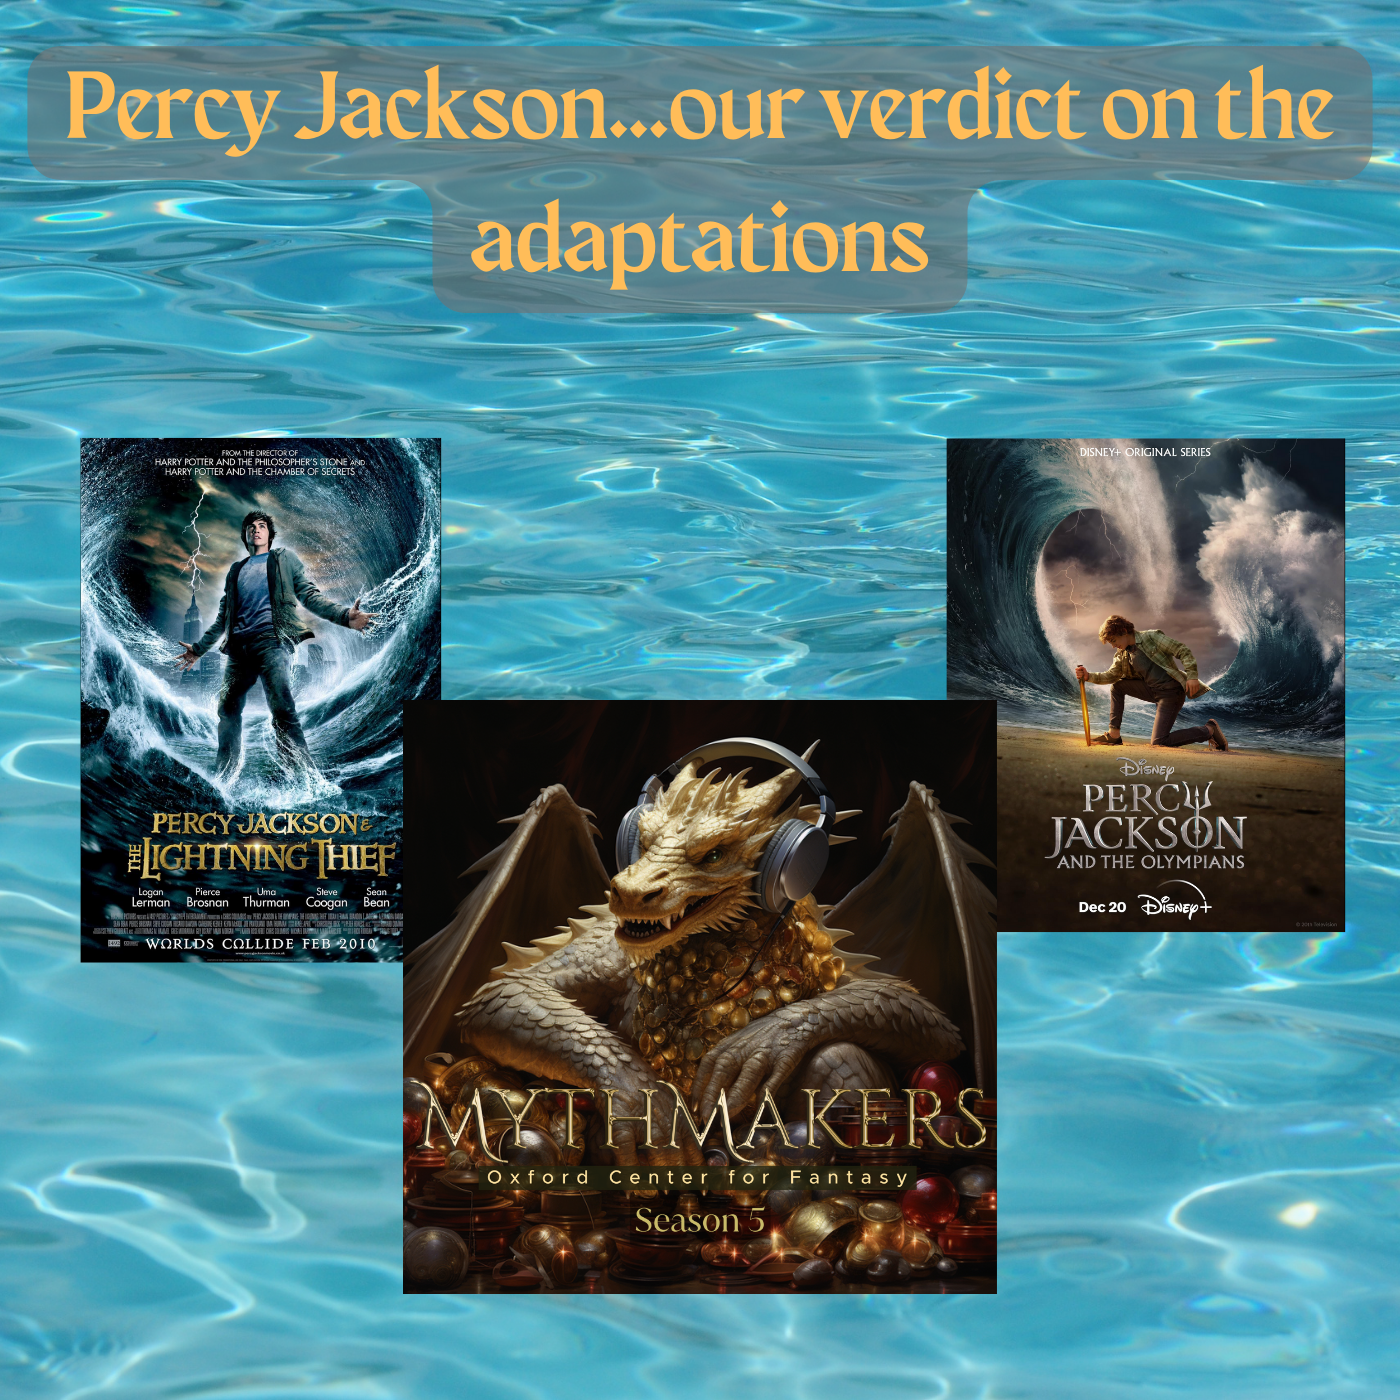 Percy Jackson... Our Verdict on the Adaptations